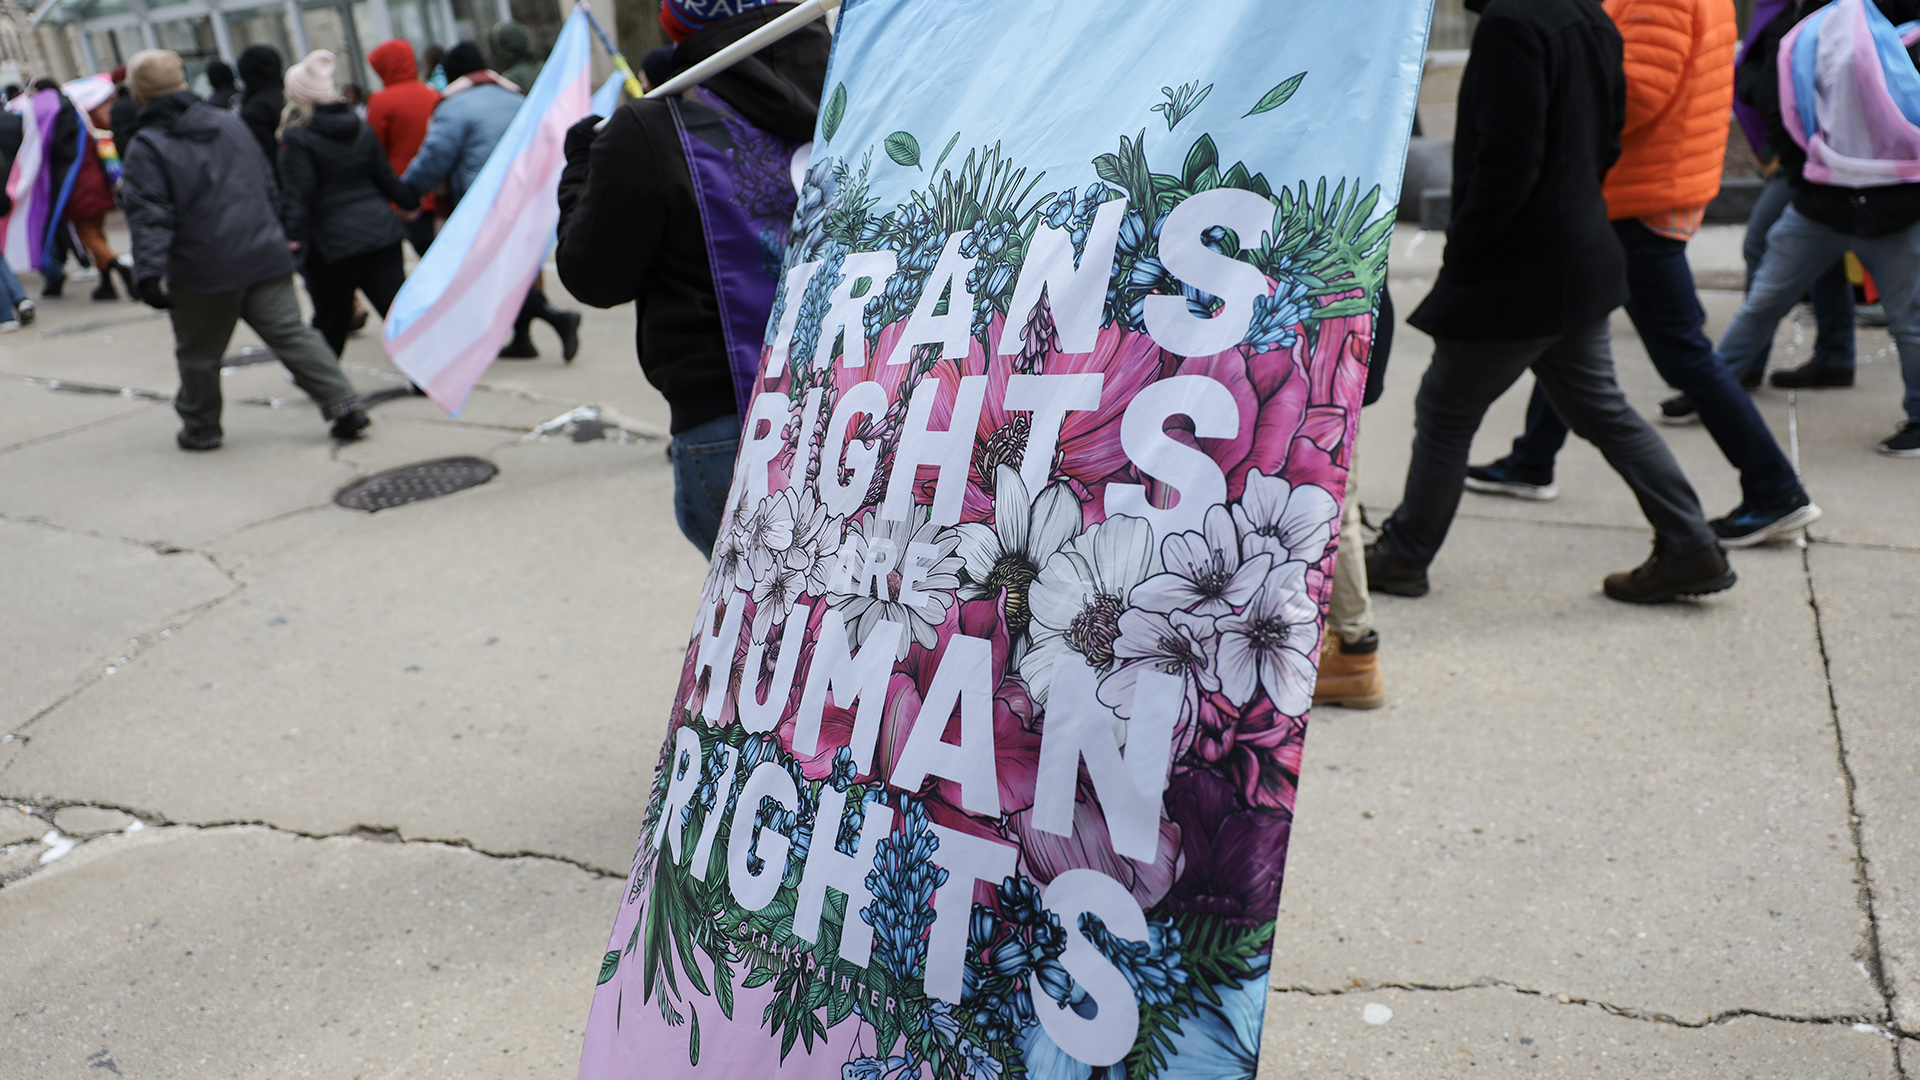 A group of people walk together in one direction along a street, with one person in the foreground holding a flag with illustrations of flowers and foliage superimposed with the words "Trans Rights Are Human Rights."